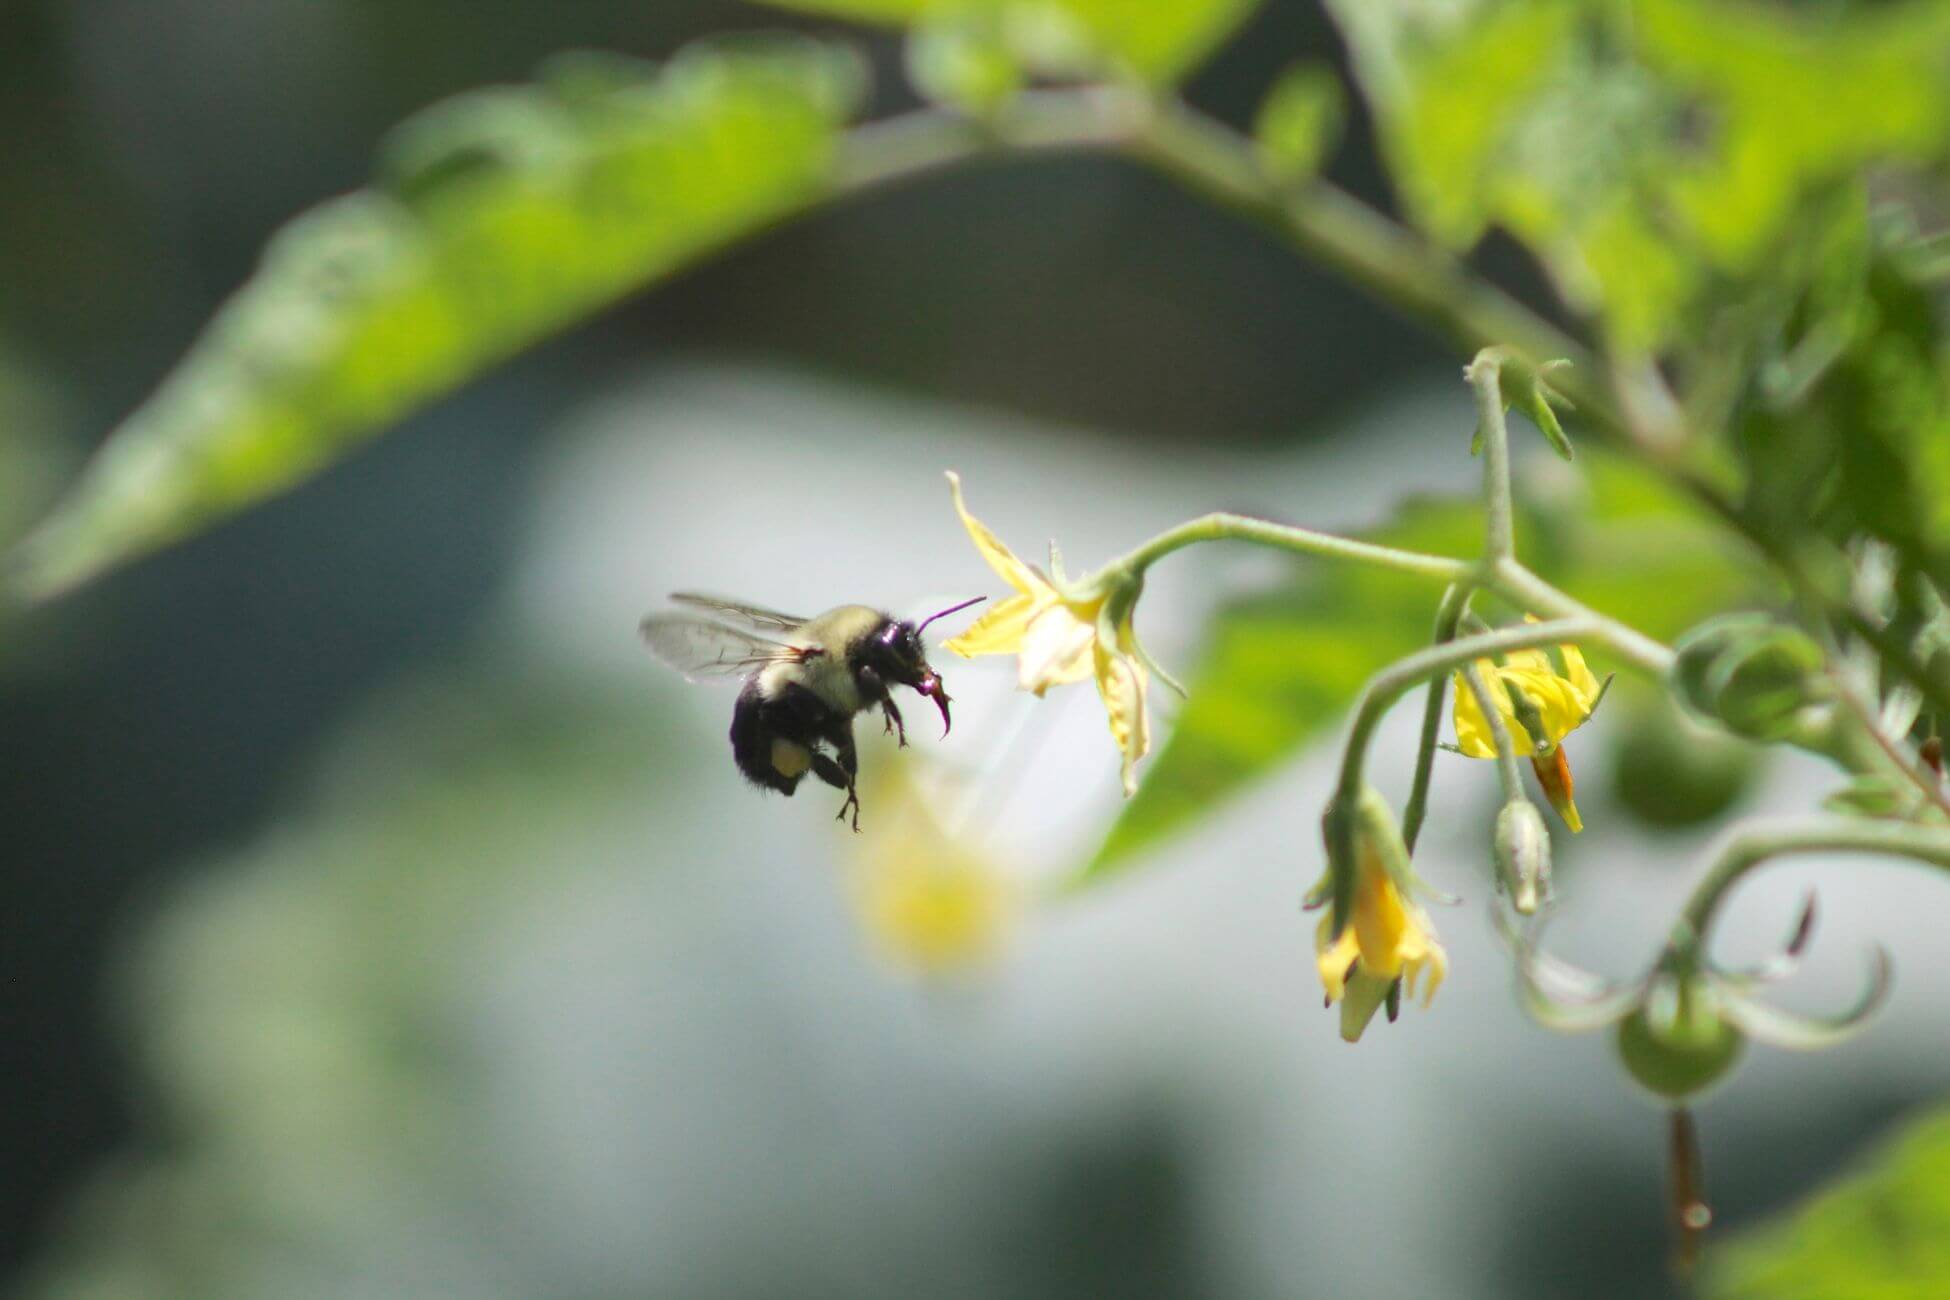 A bumblebee hovers by yellow flowers on a green open-pollinated tomato plant. The bee is clear, the background blurred, capturing its detail and connection to the flowers.